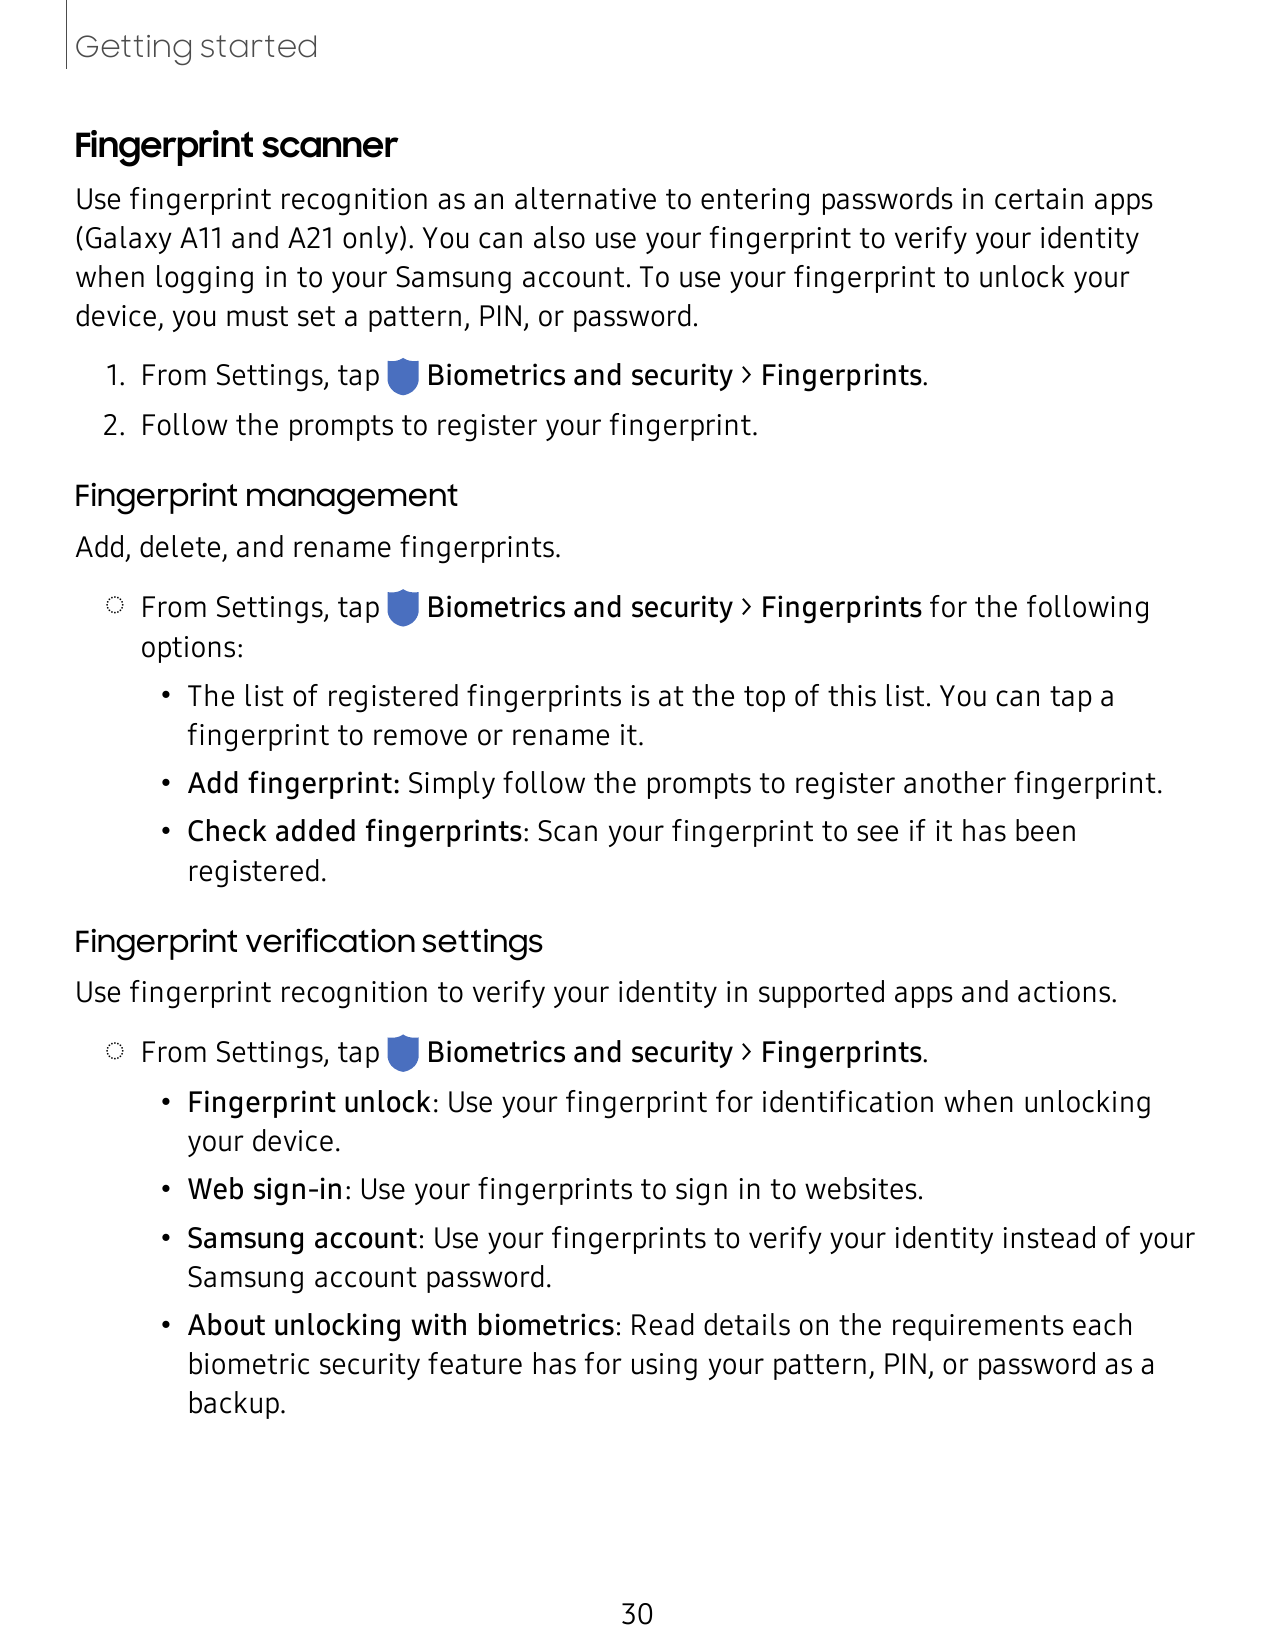 Getting startedFingerprint scannerUse fingerprint recognition as an alternative to entering passwords in certain apps(Galaxy A11